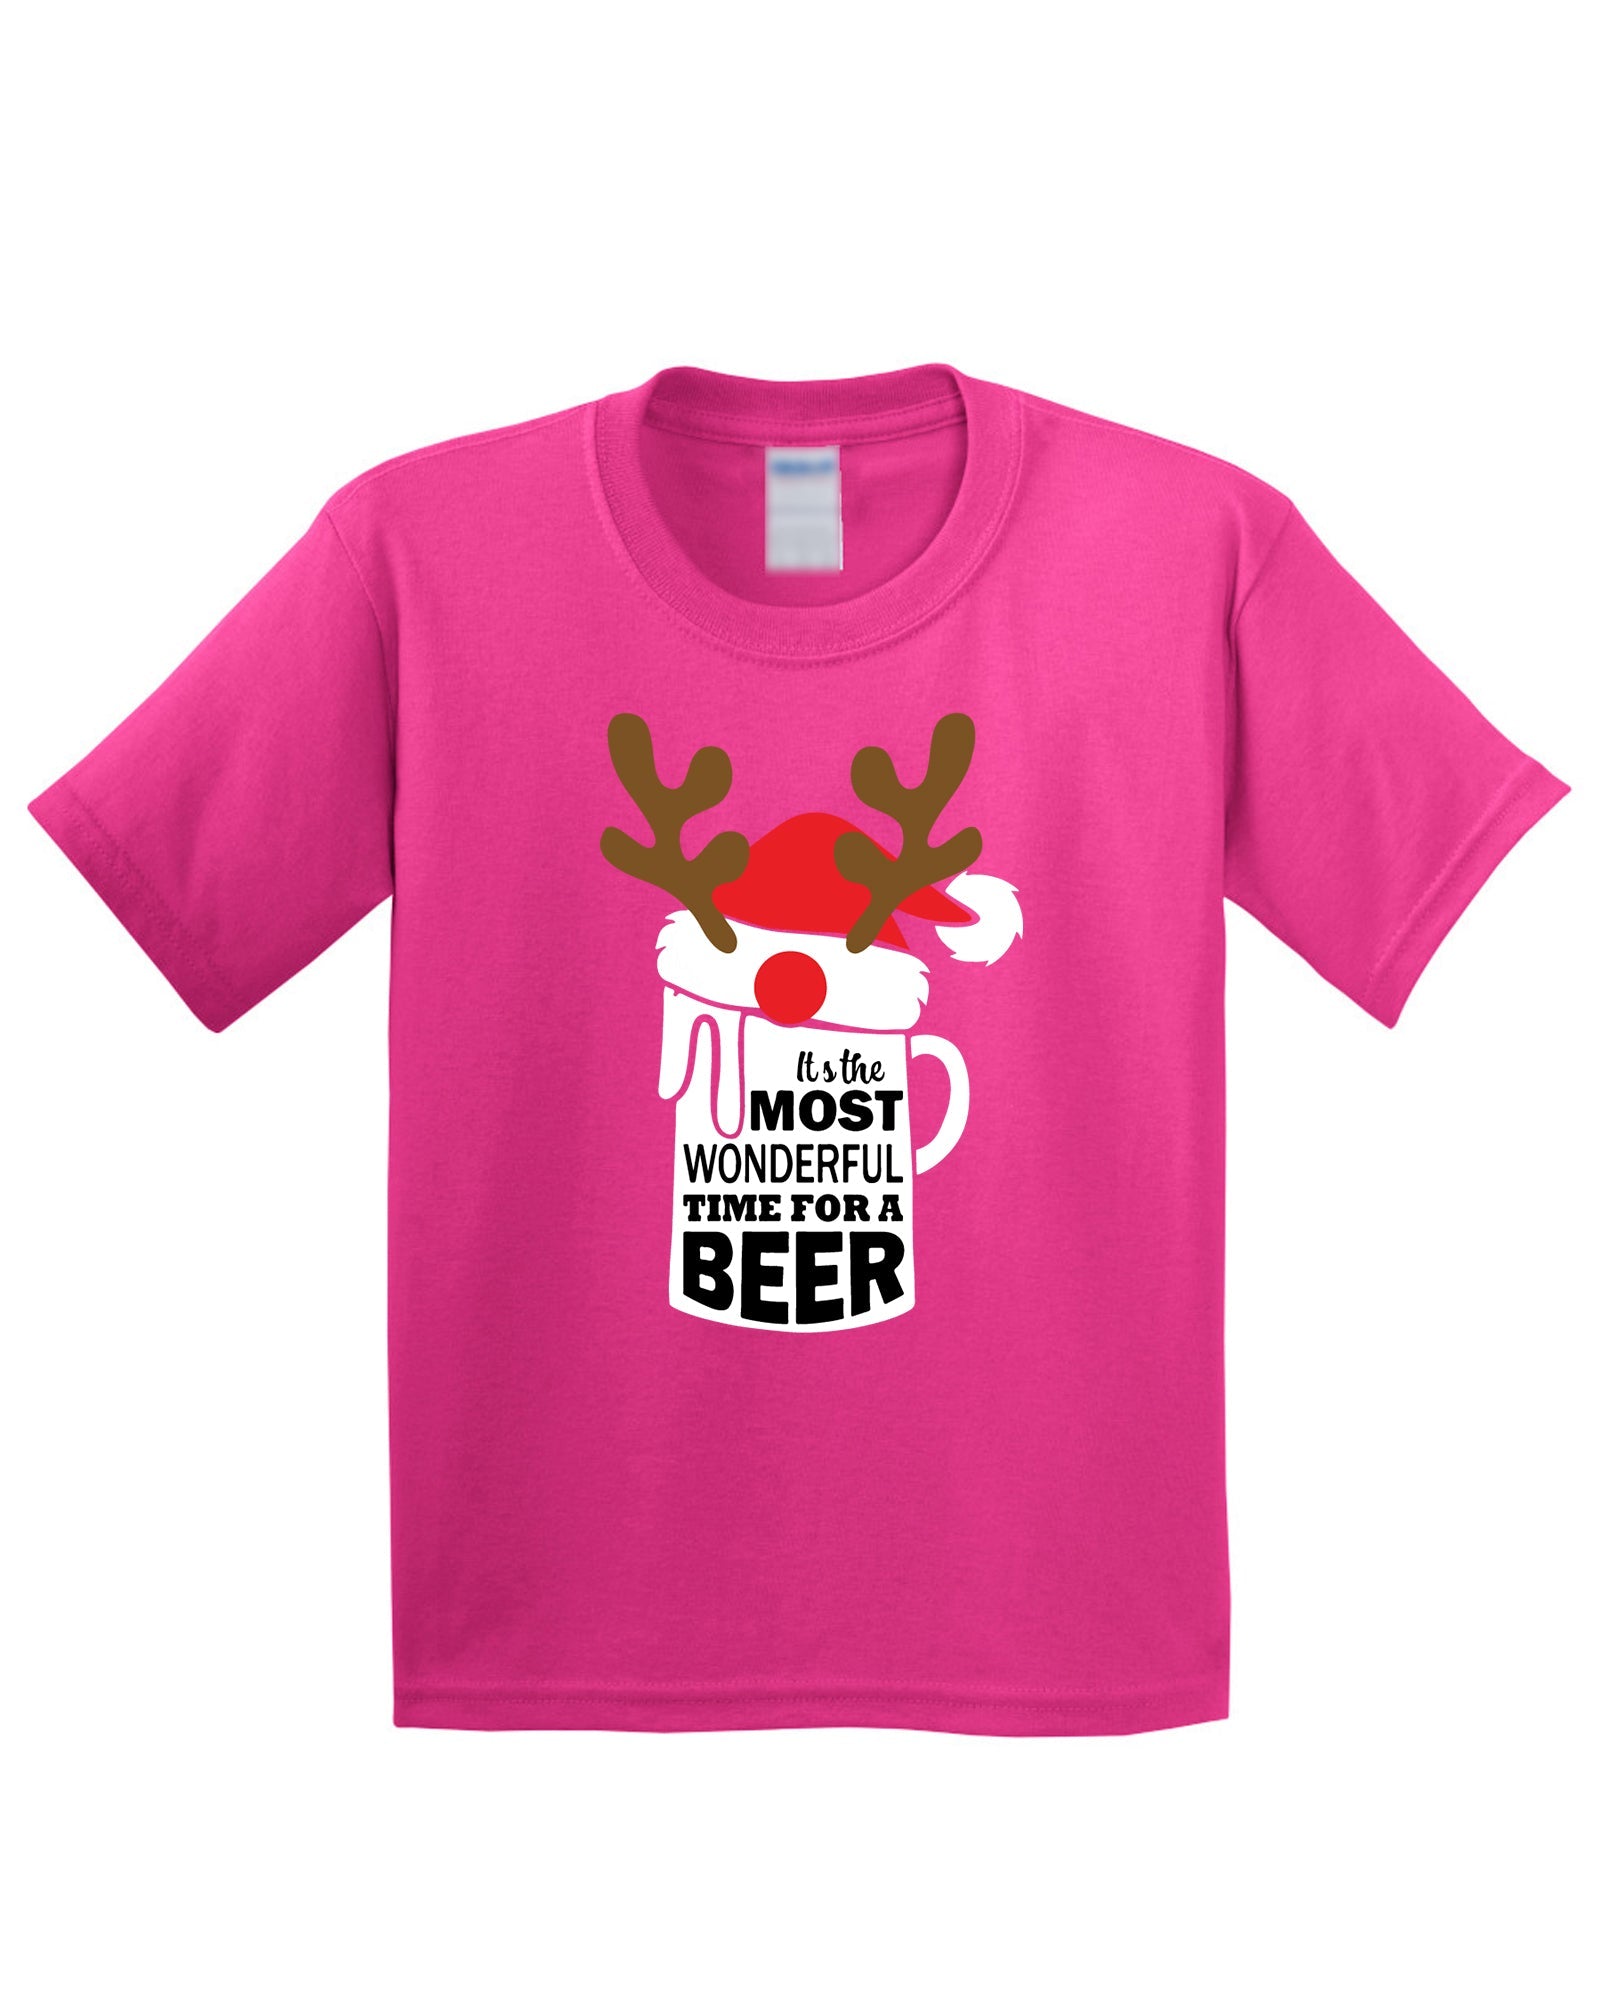 Time For A Beer Kids T-Shirt - ApparelinClick